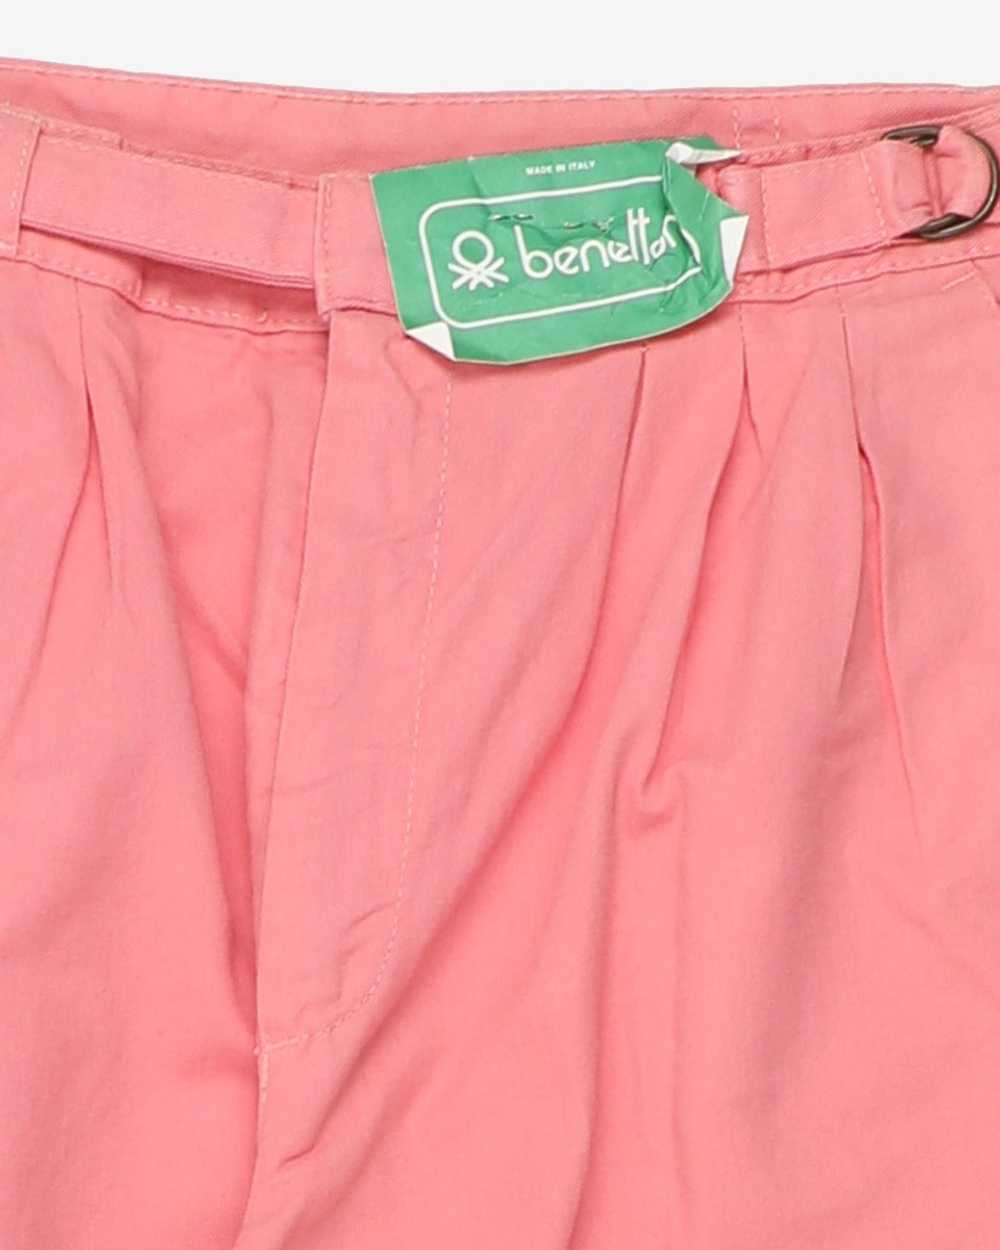 Benetton deadstock 1980's pleated high waisted tr… - image 2